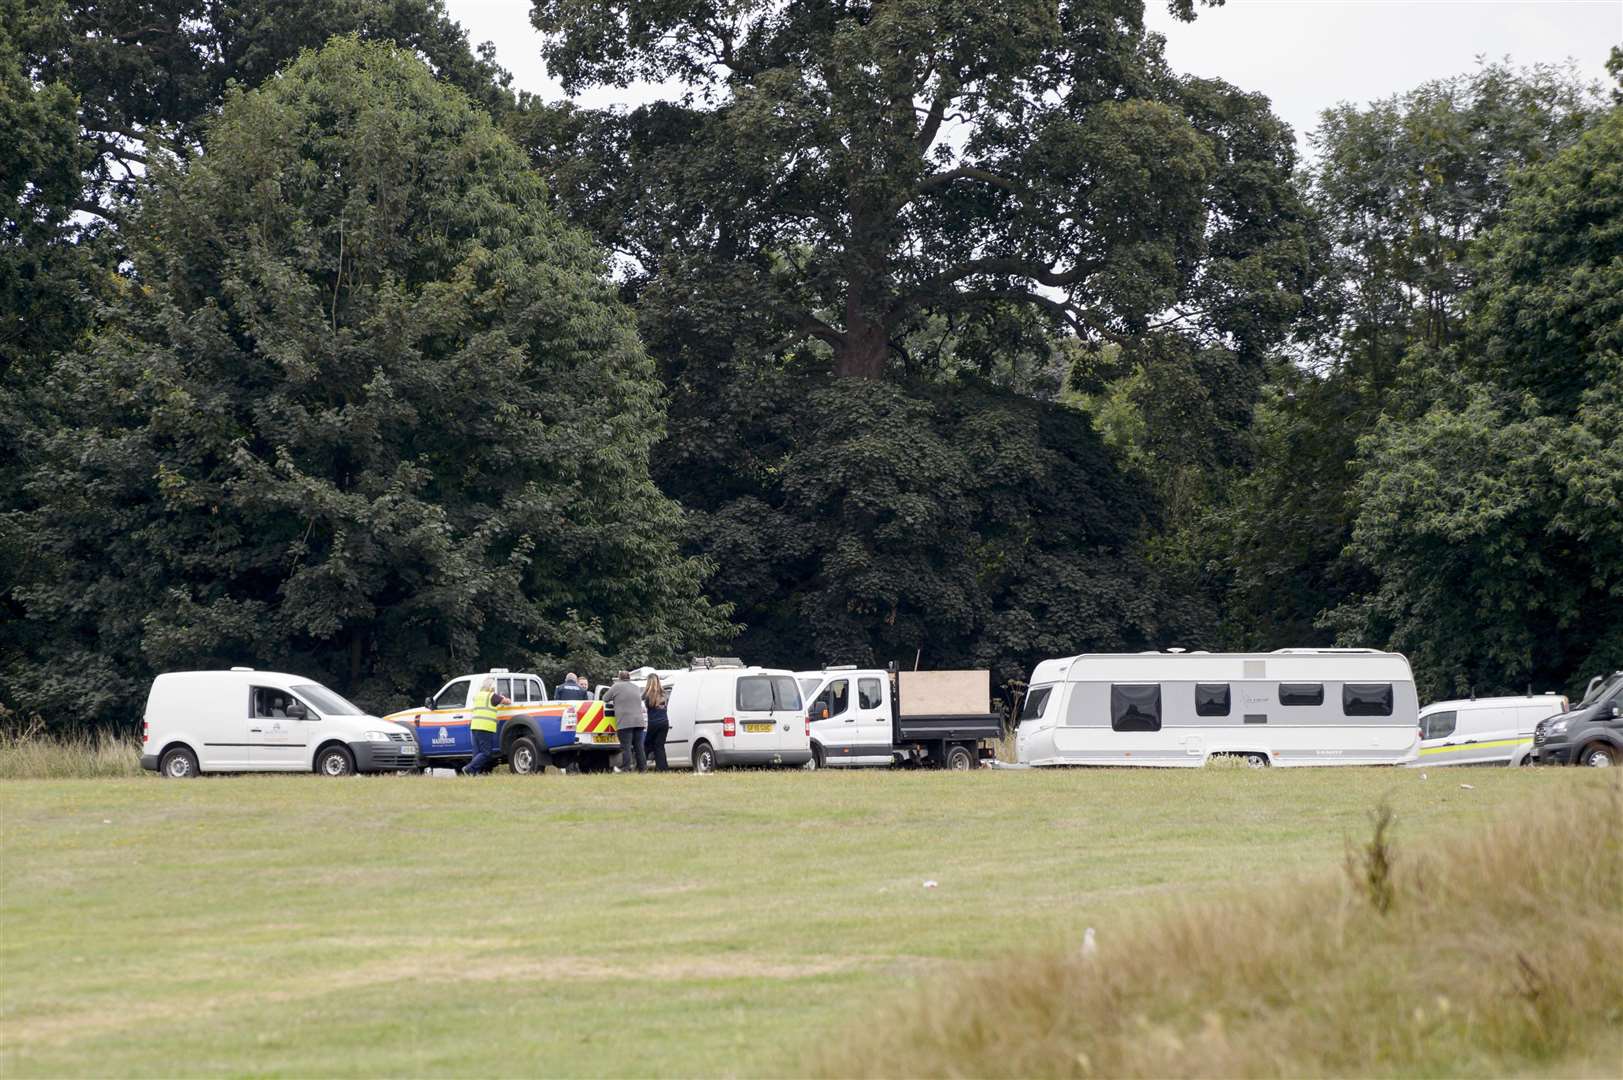 Travellers on Mote Park, Maidstone, begin moving on under supervision by Maidstone Borough Council officers